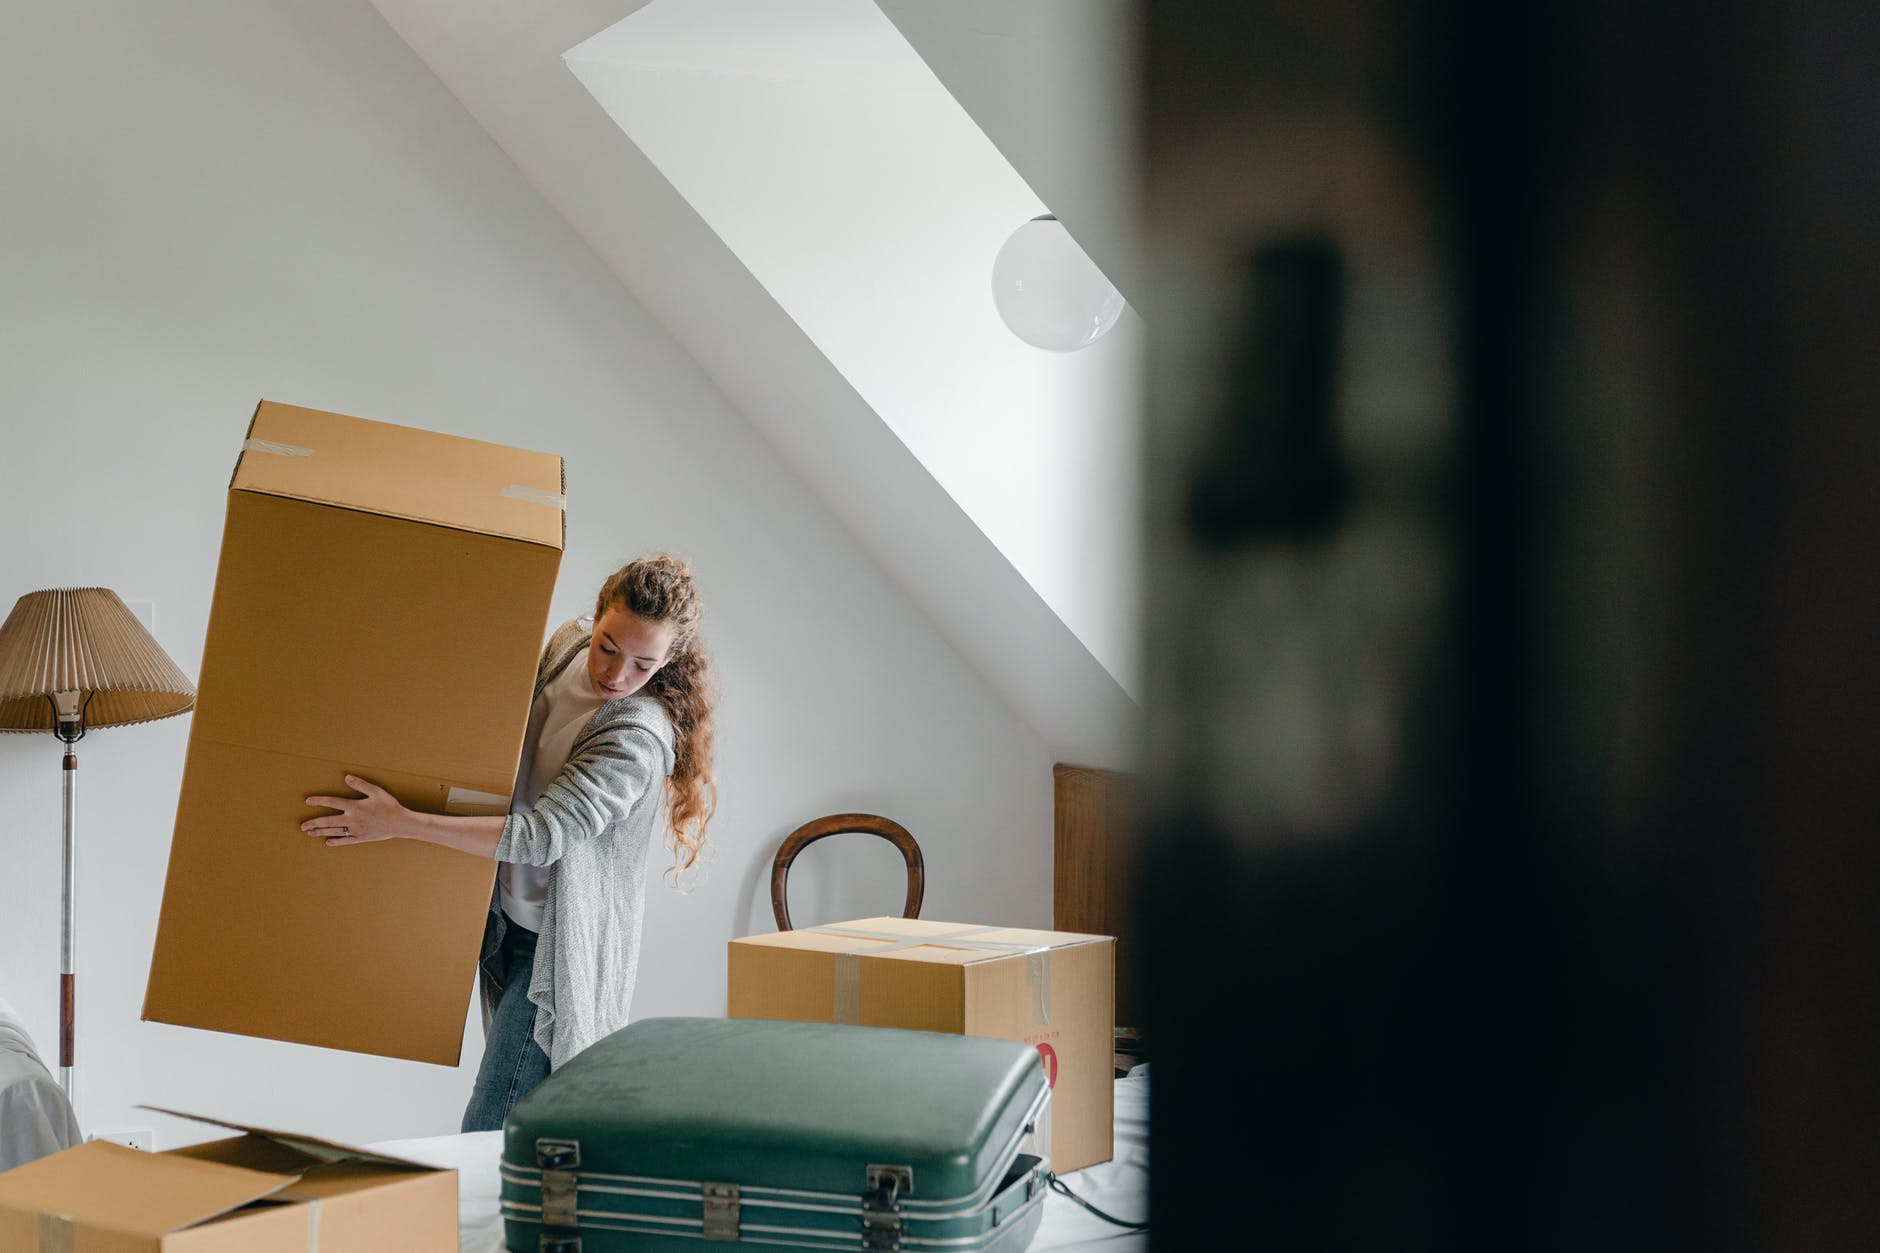 His ex-girlfriend moving out of the house | Photo: Pexels